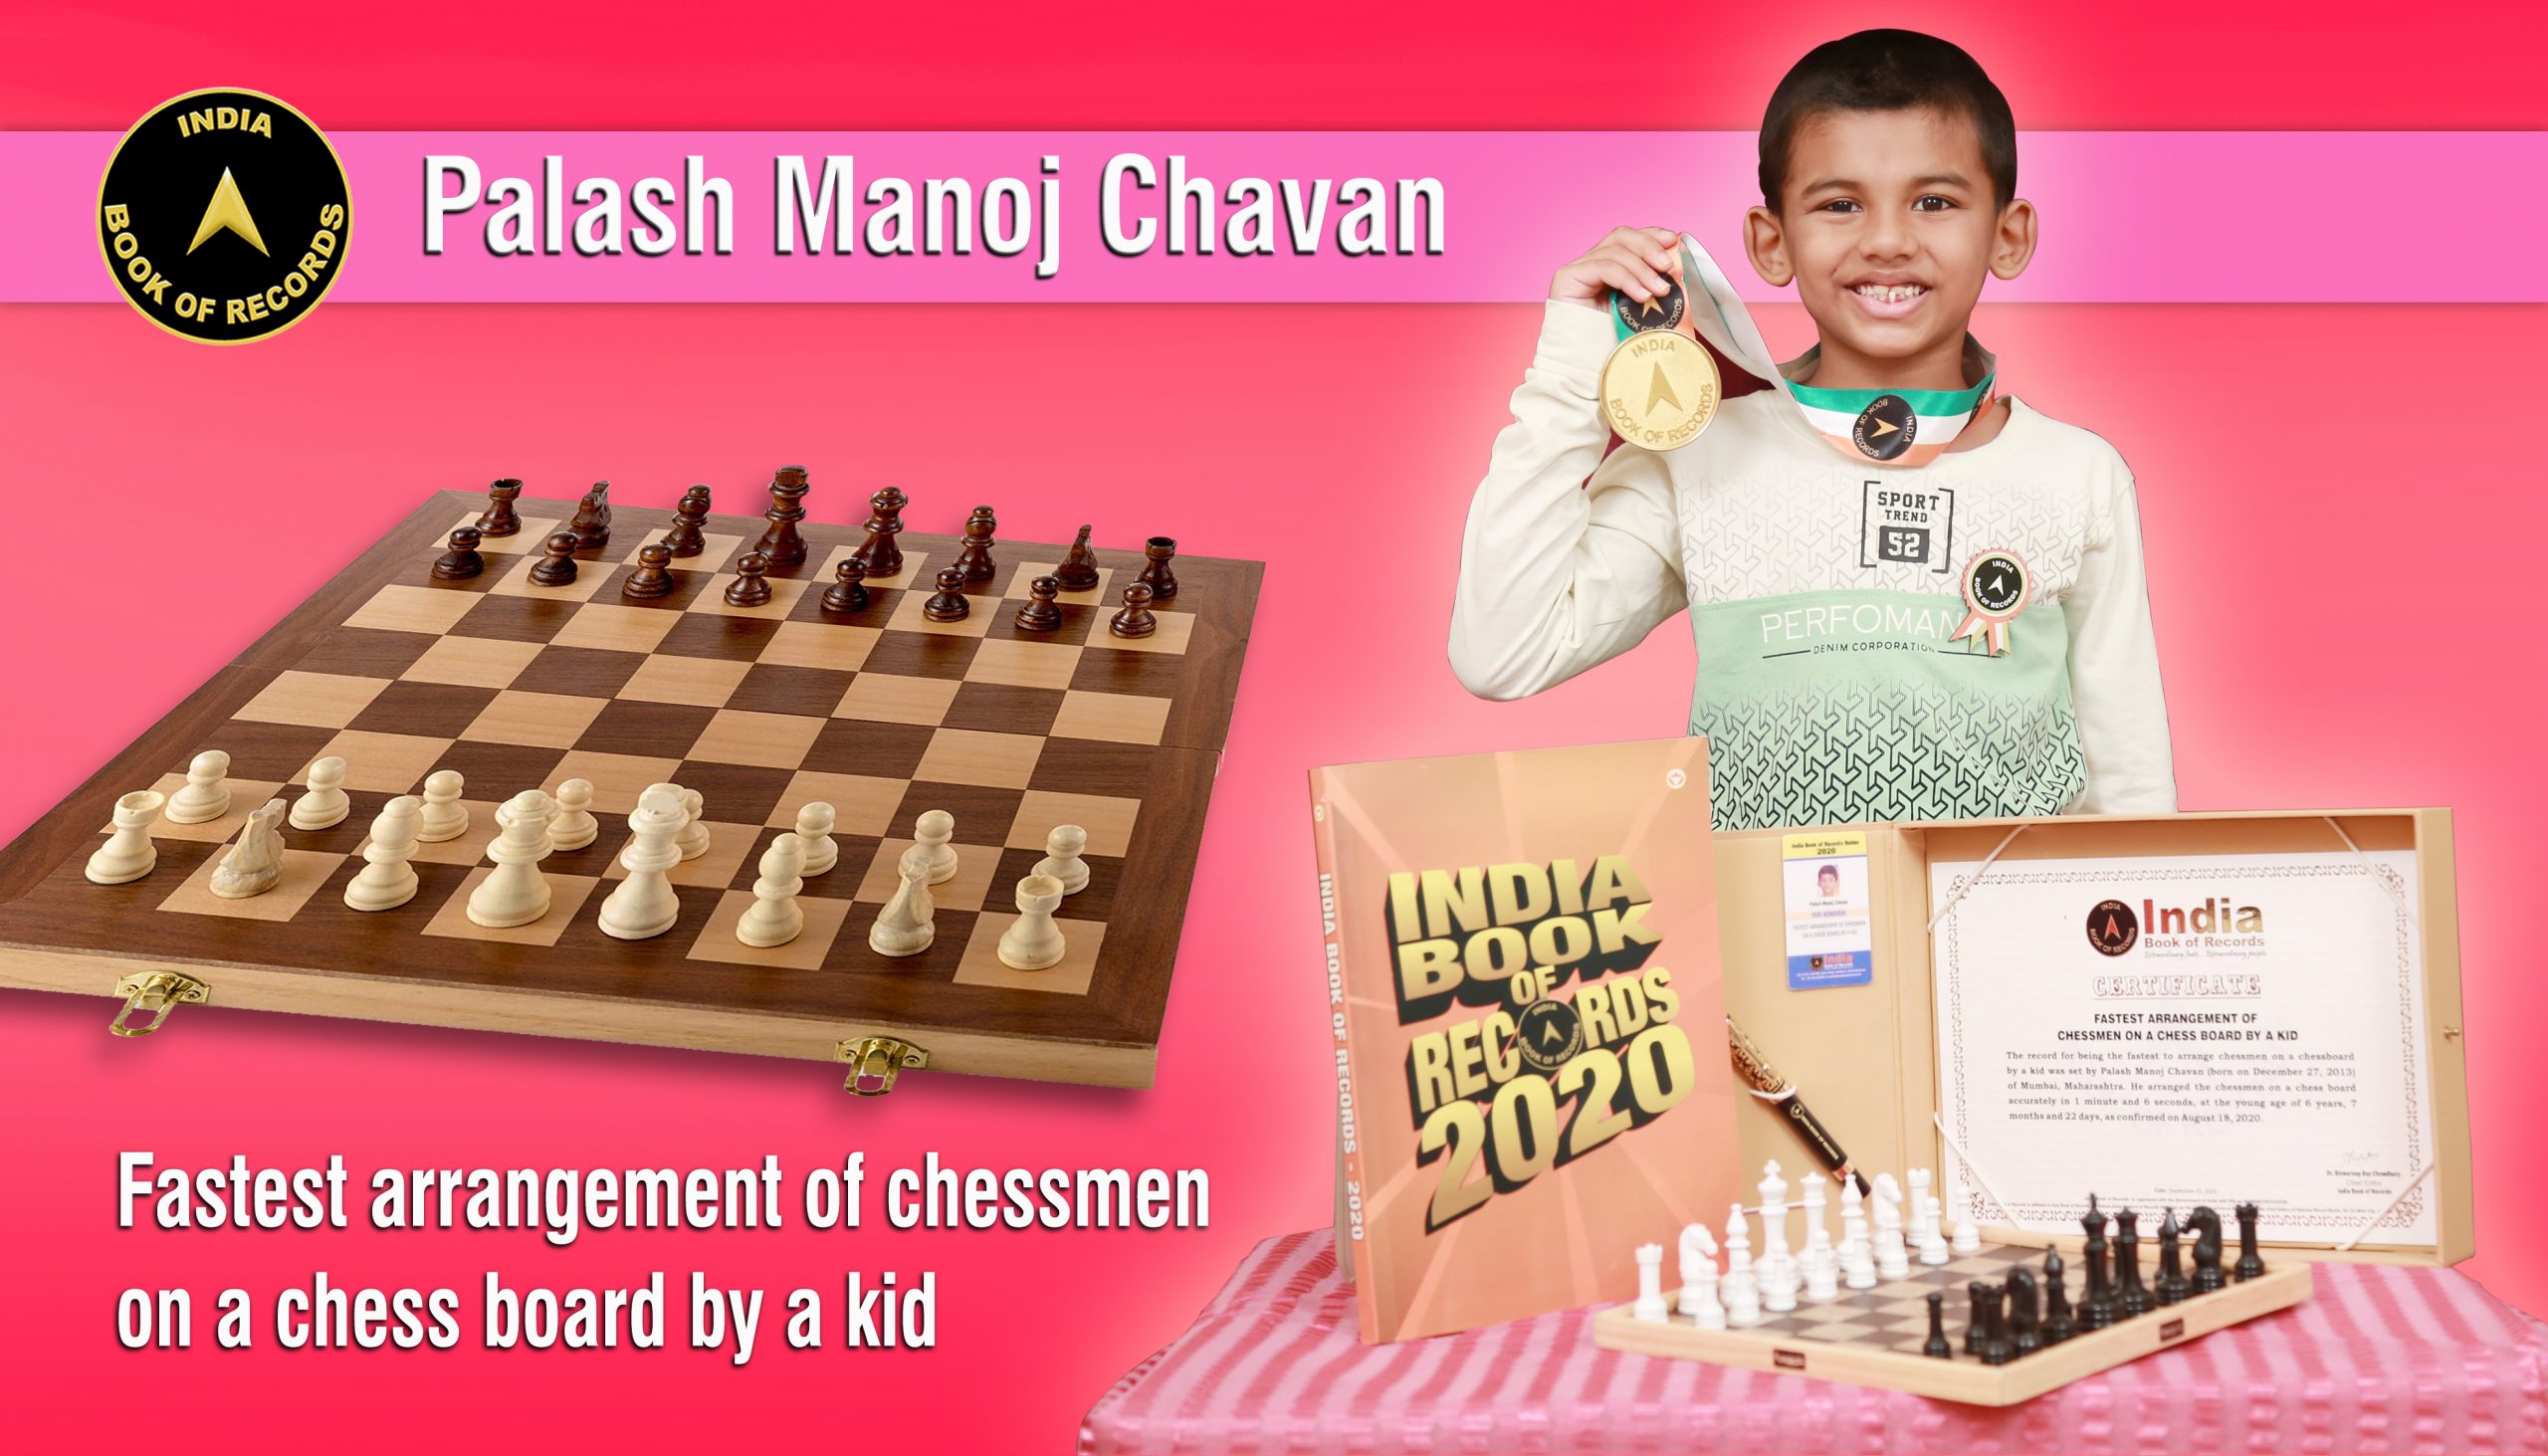 At 16, India's big chess hope scales first peak, beats his own